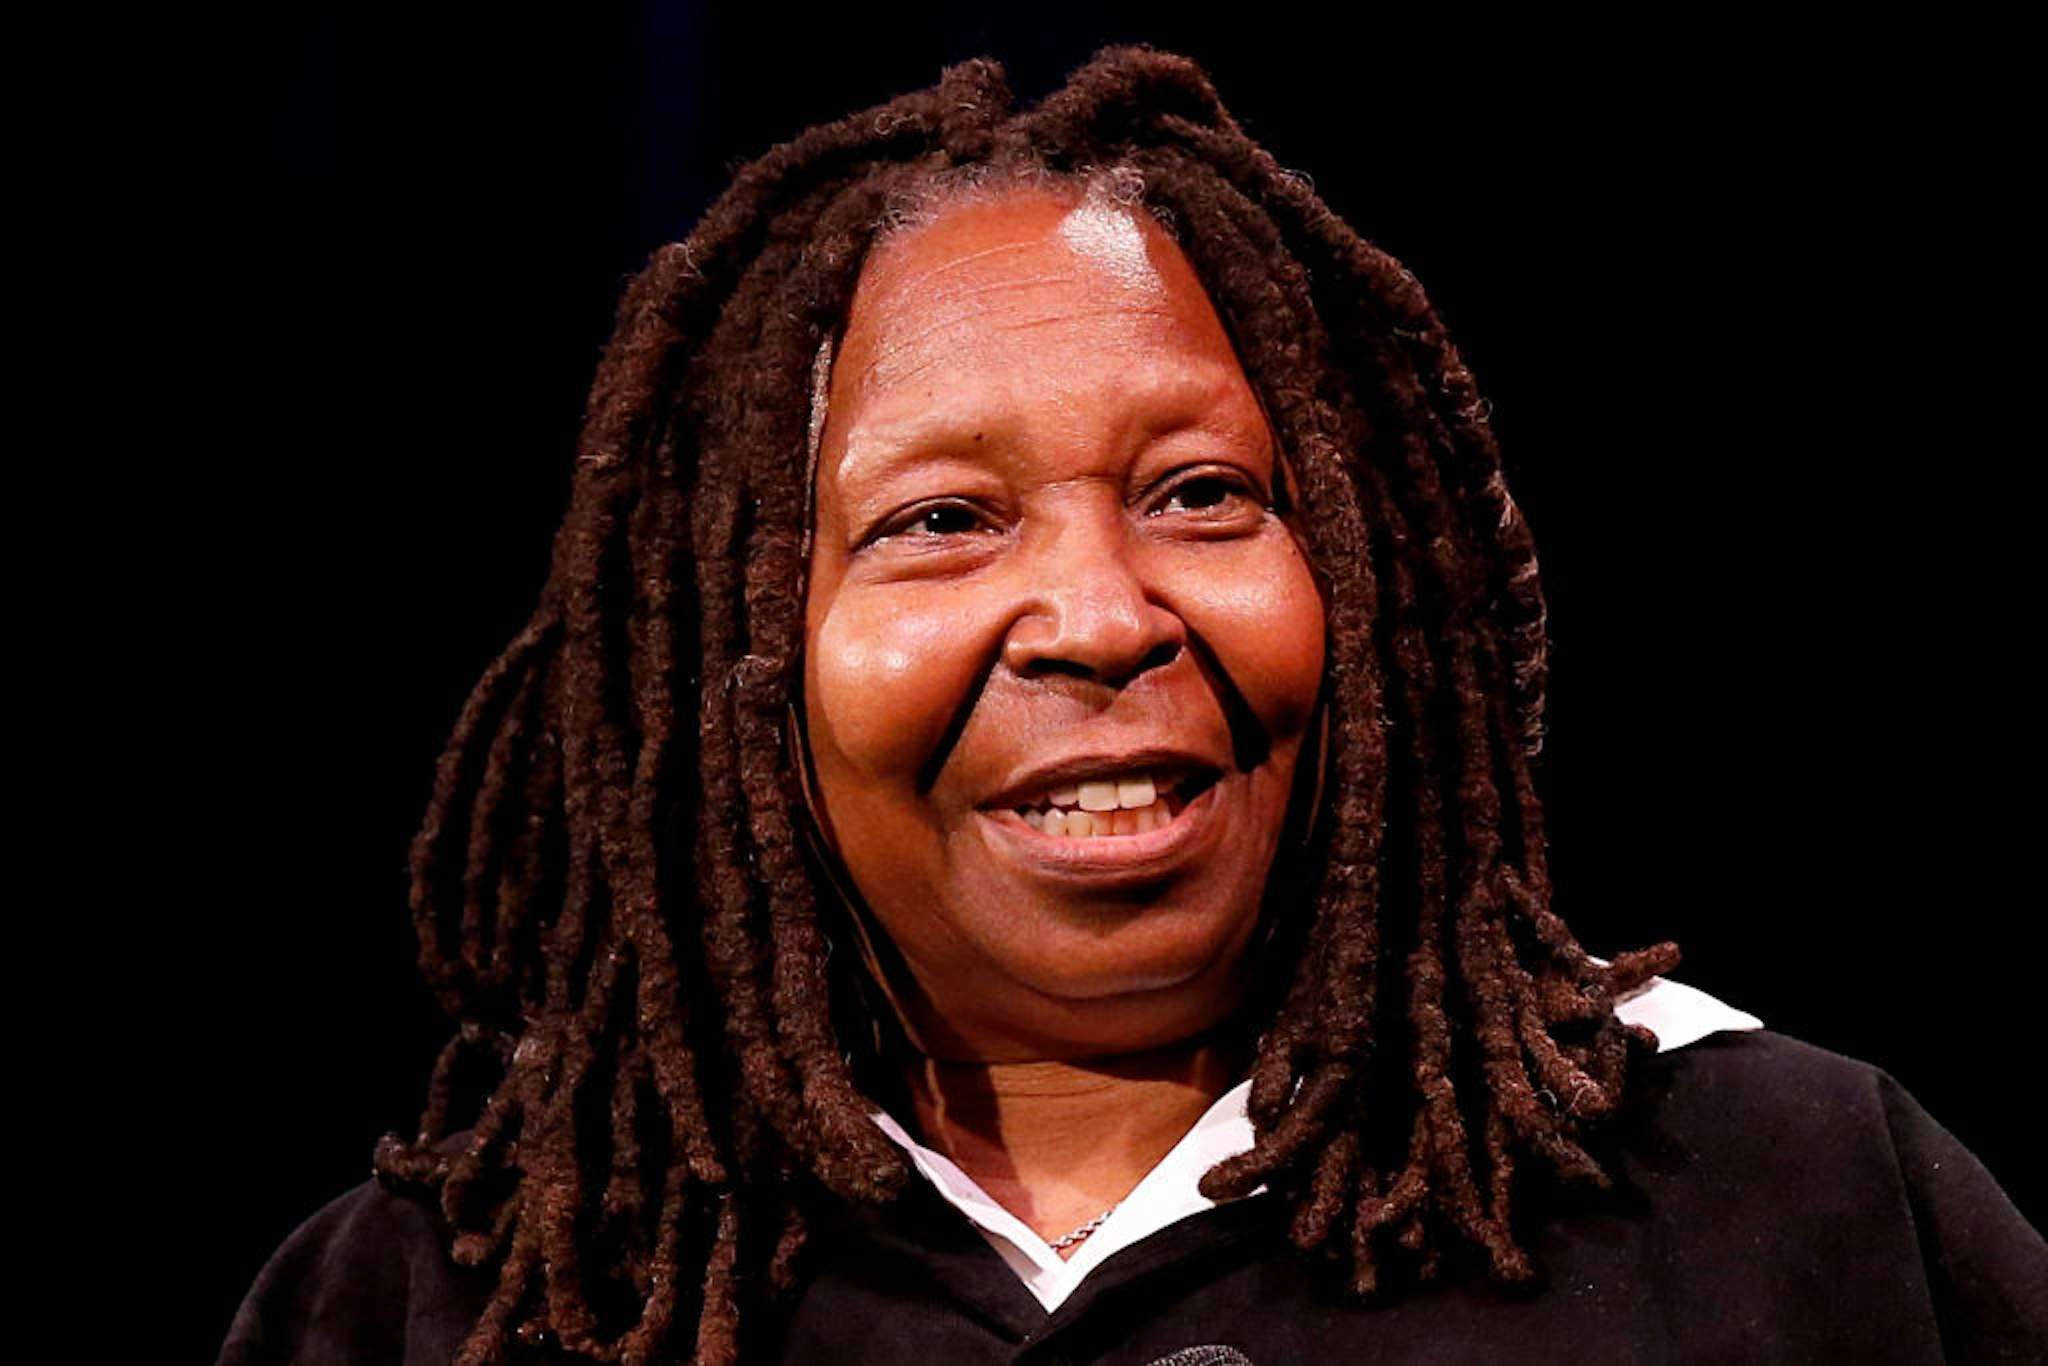 NEW YORK, NEW YORK - MARCH 24: Whoopi Goldberg attends a conversation and screening for MGM+'s "Godfather Of Harlem" at The 92nd Street Y, New York on March 24, 2023 in New York City. (Photo by Dominik Bindl/Getty Images)